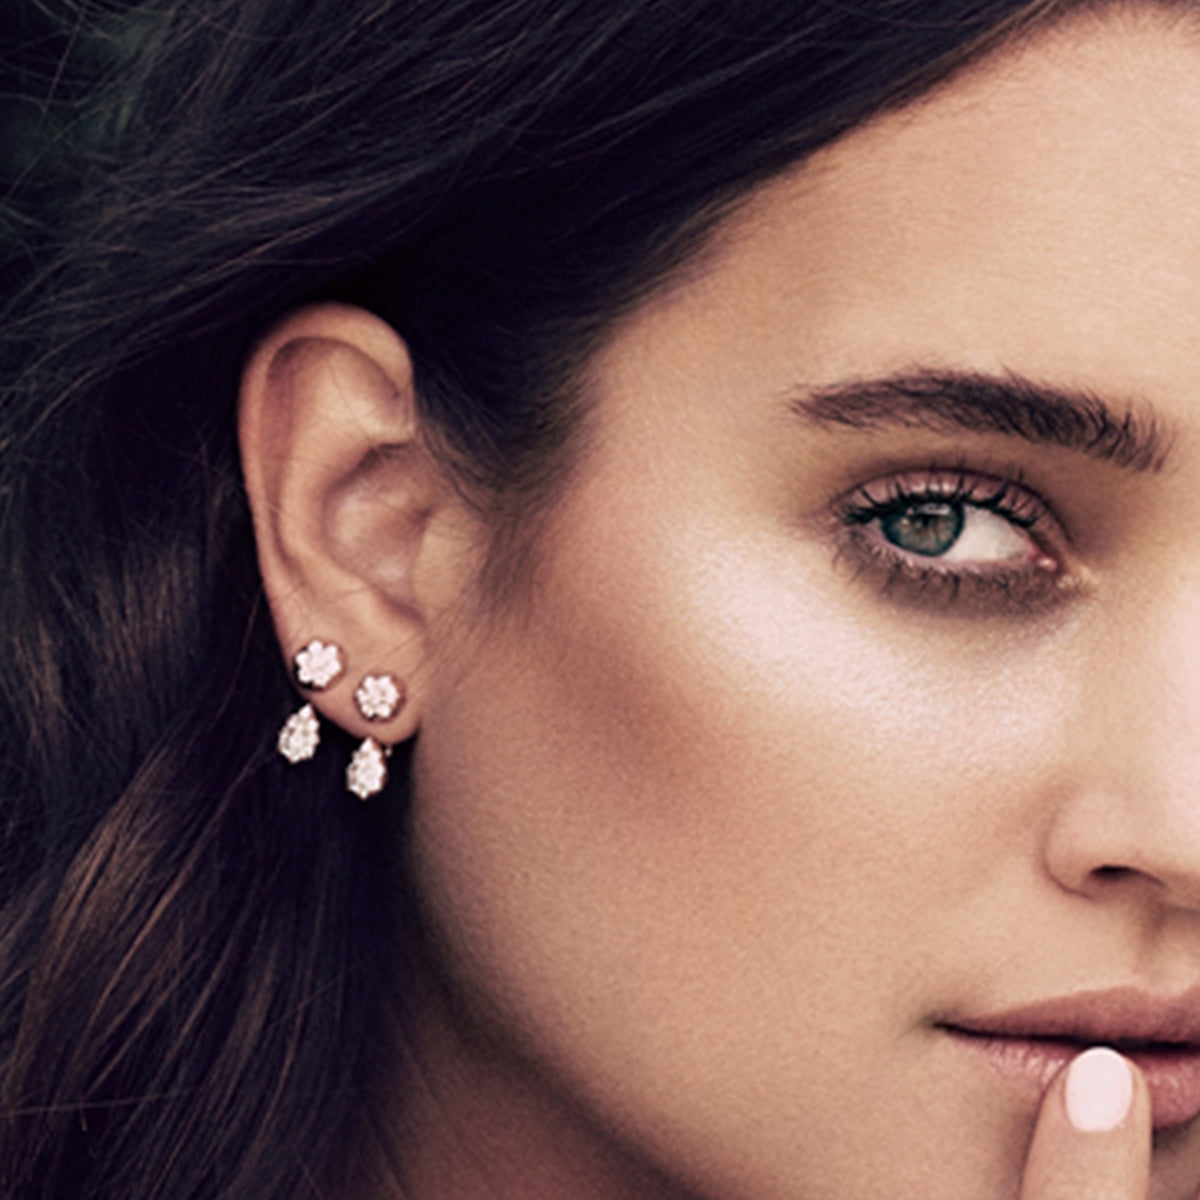 Here, the Elixir Earrings are shown in rose gold.